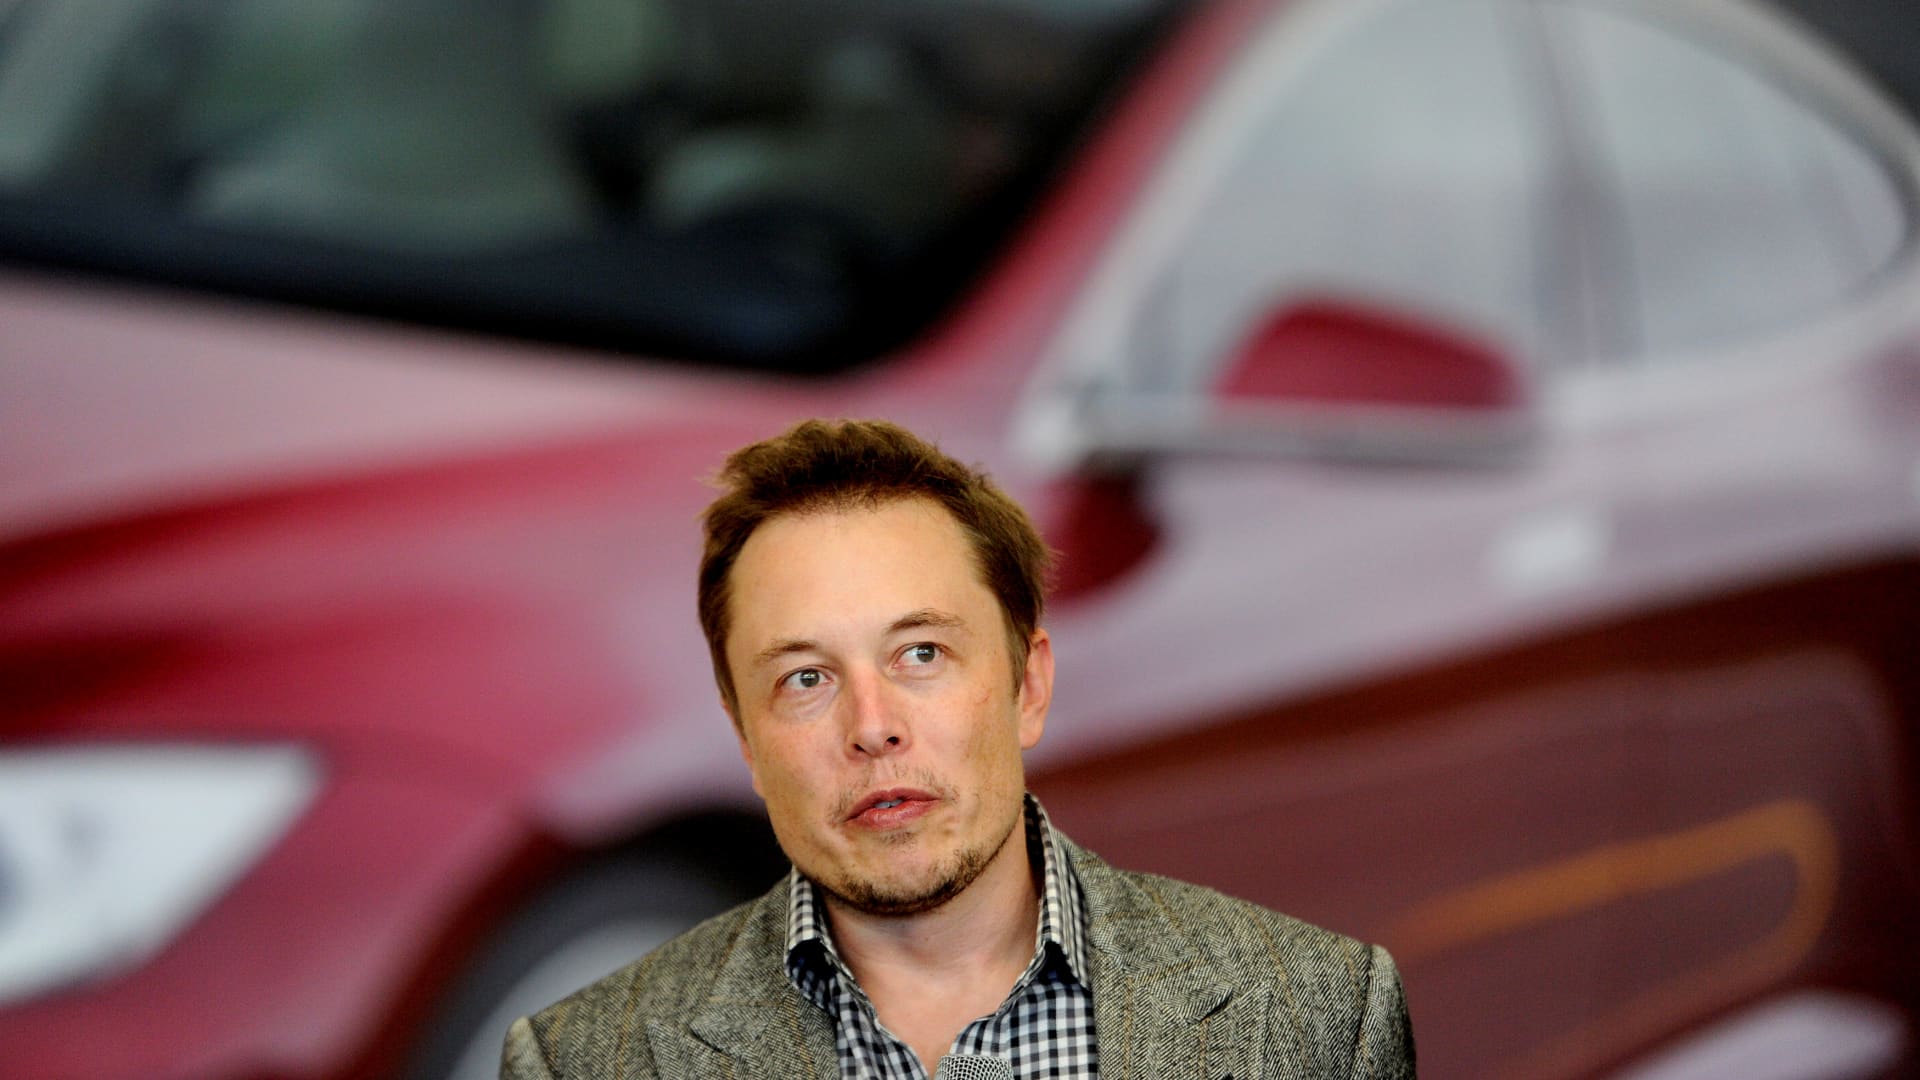 Tesla Chief Executive Office Elon Musk speaks at his company's factory in Fremont, California.